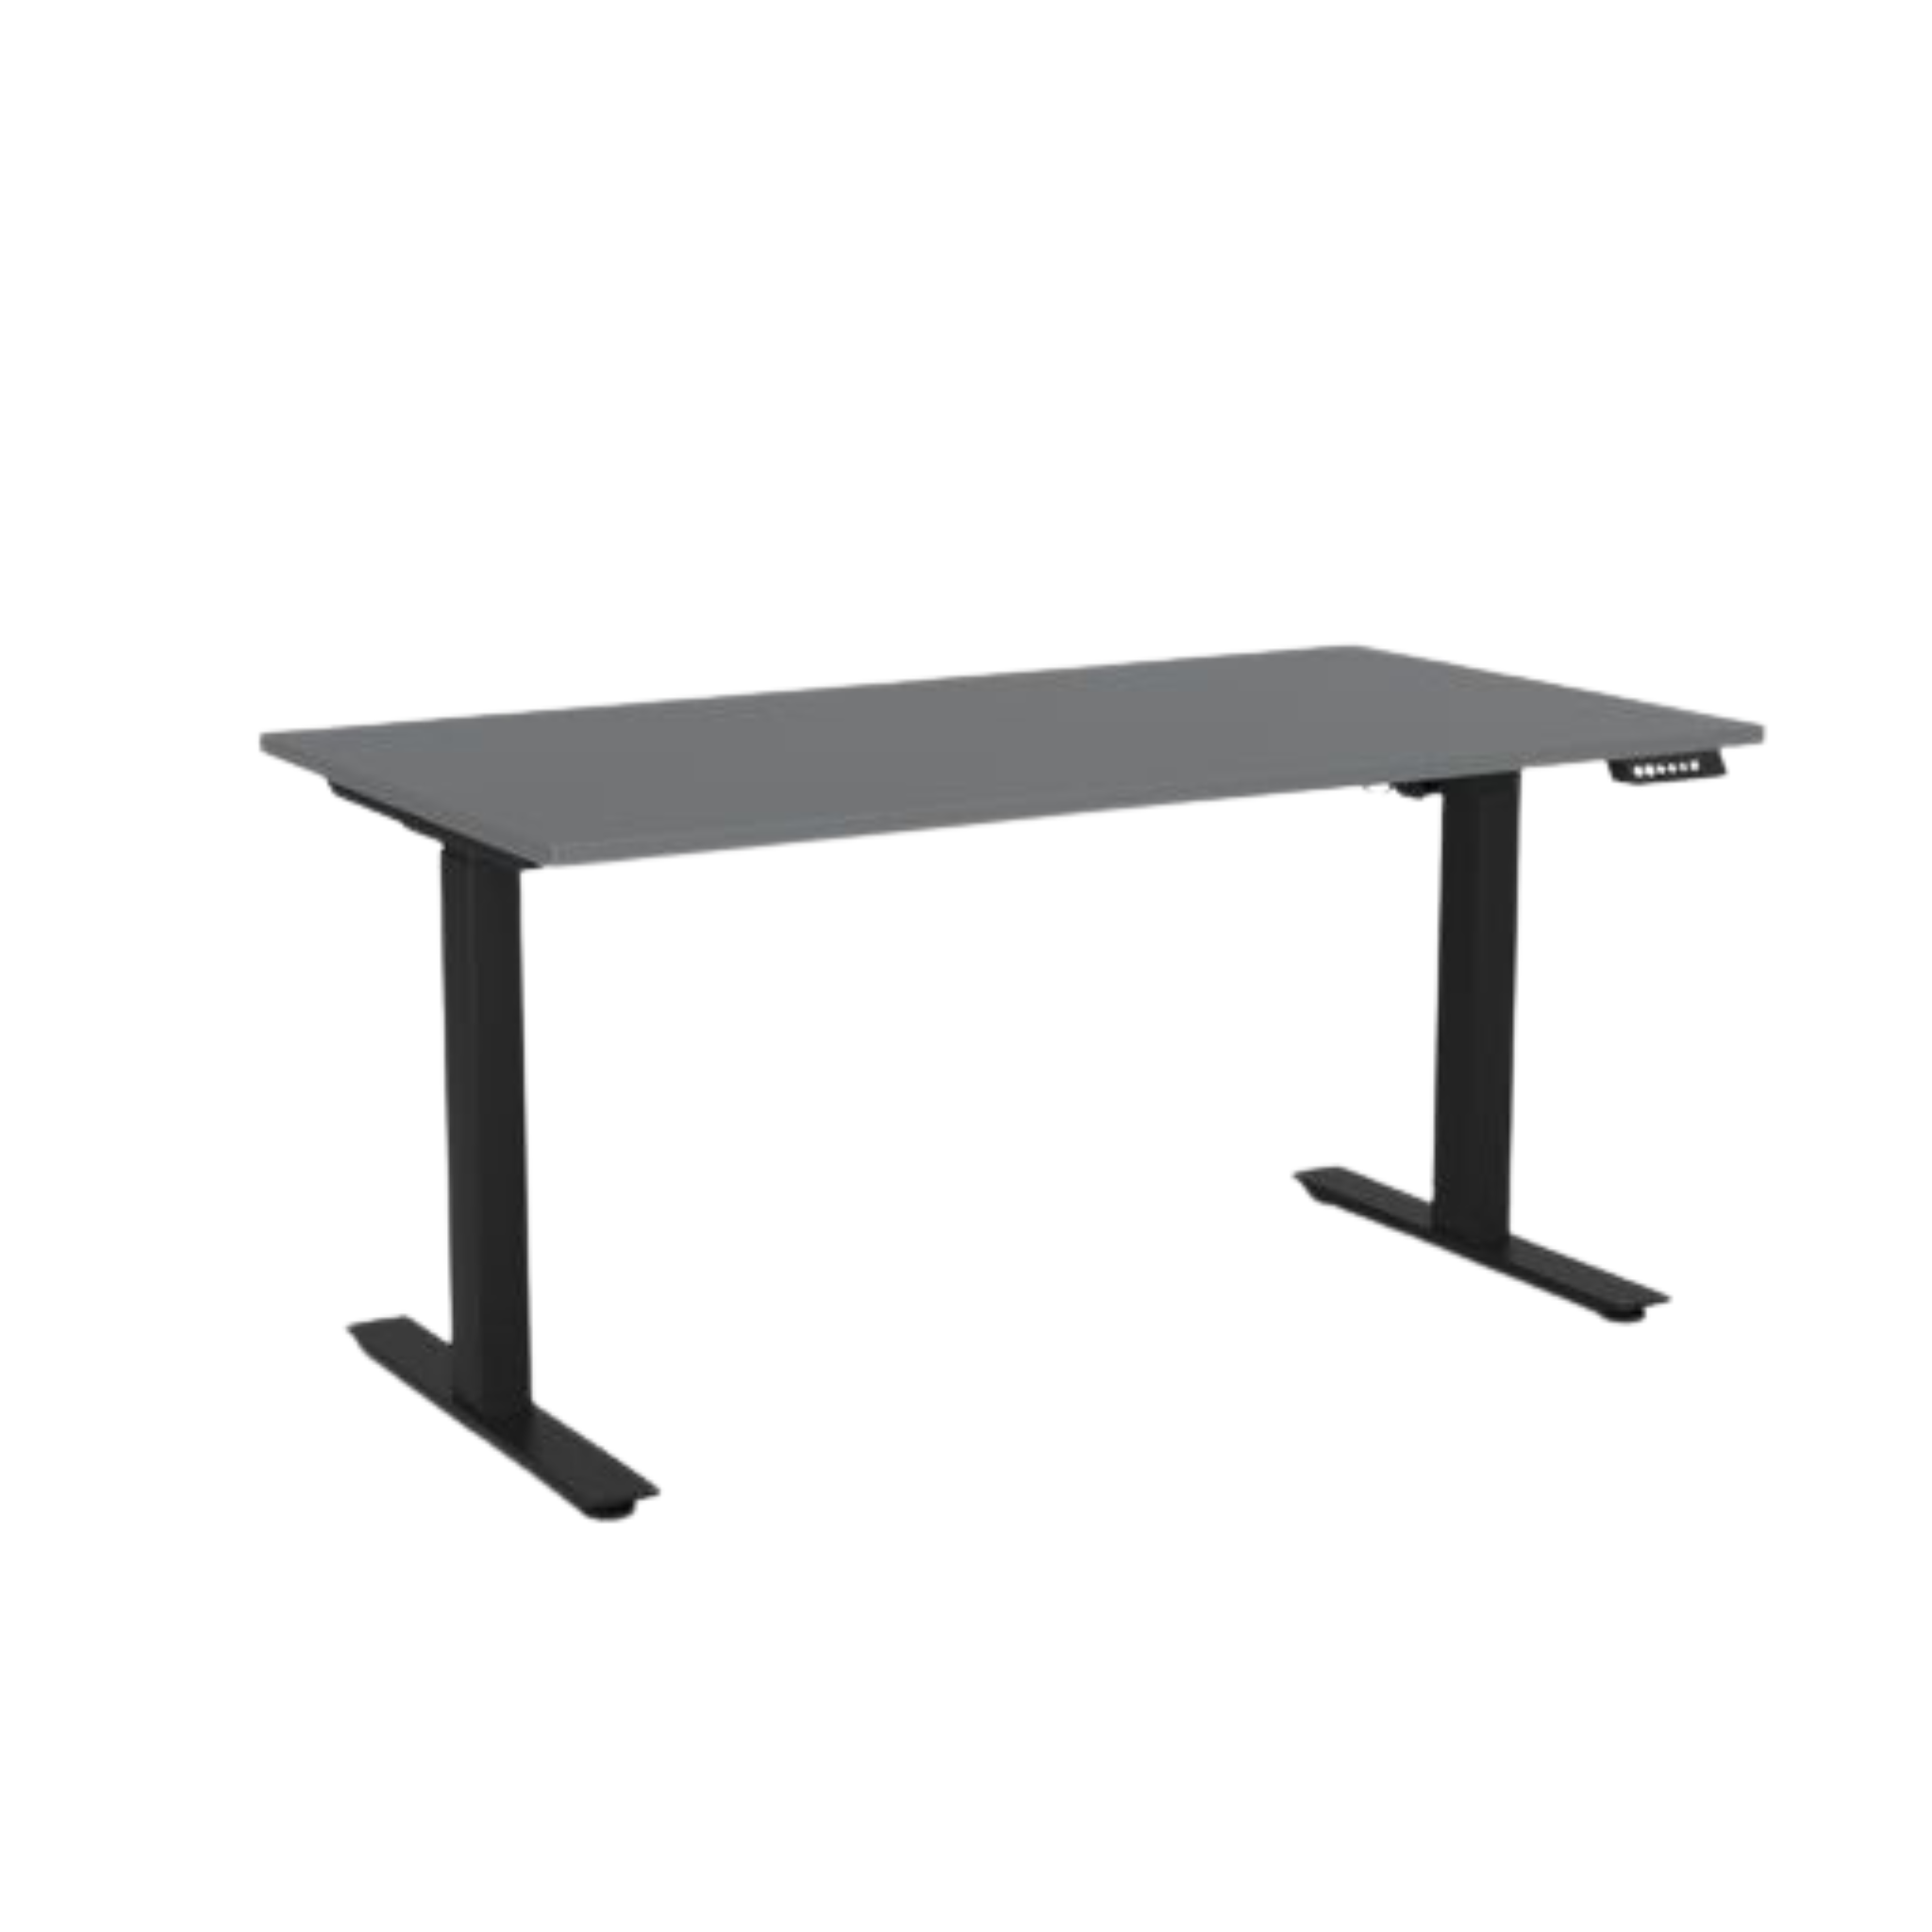 Agile 2 electric sit to stand desk with black frame and silver top